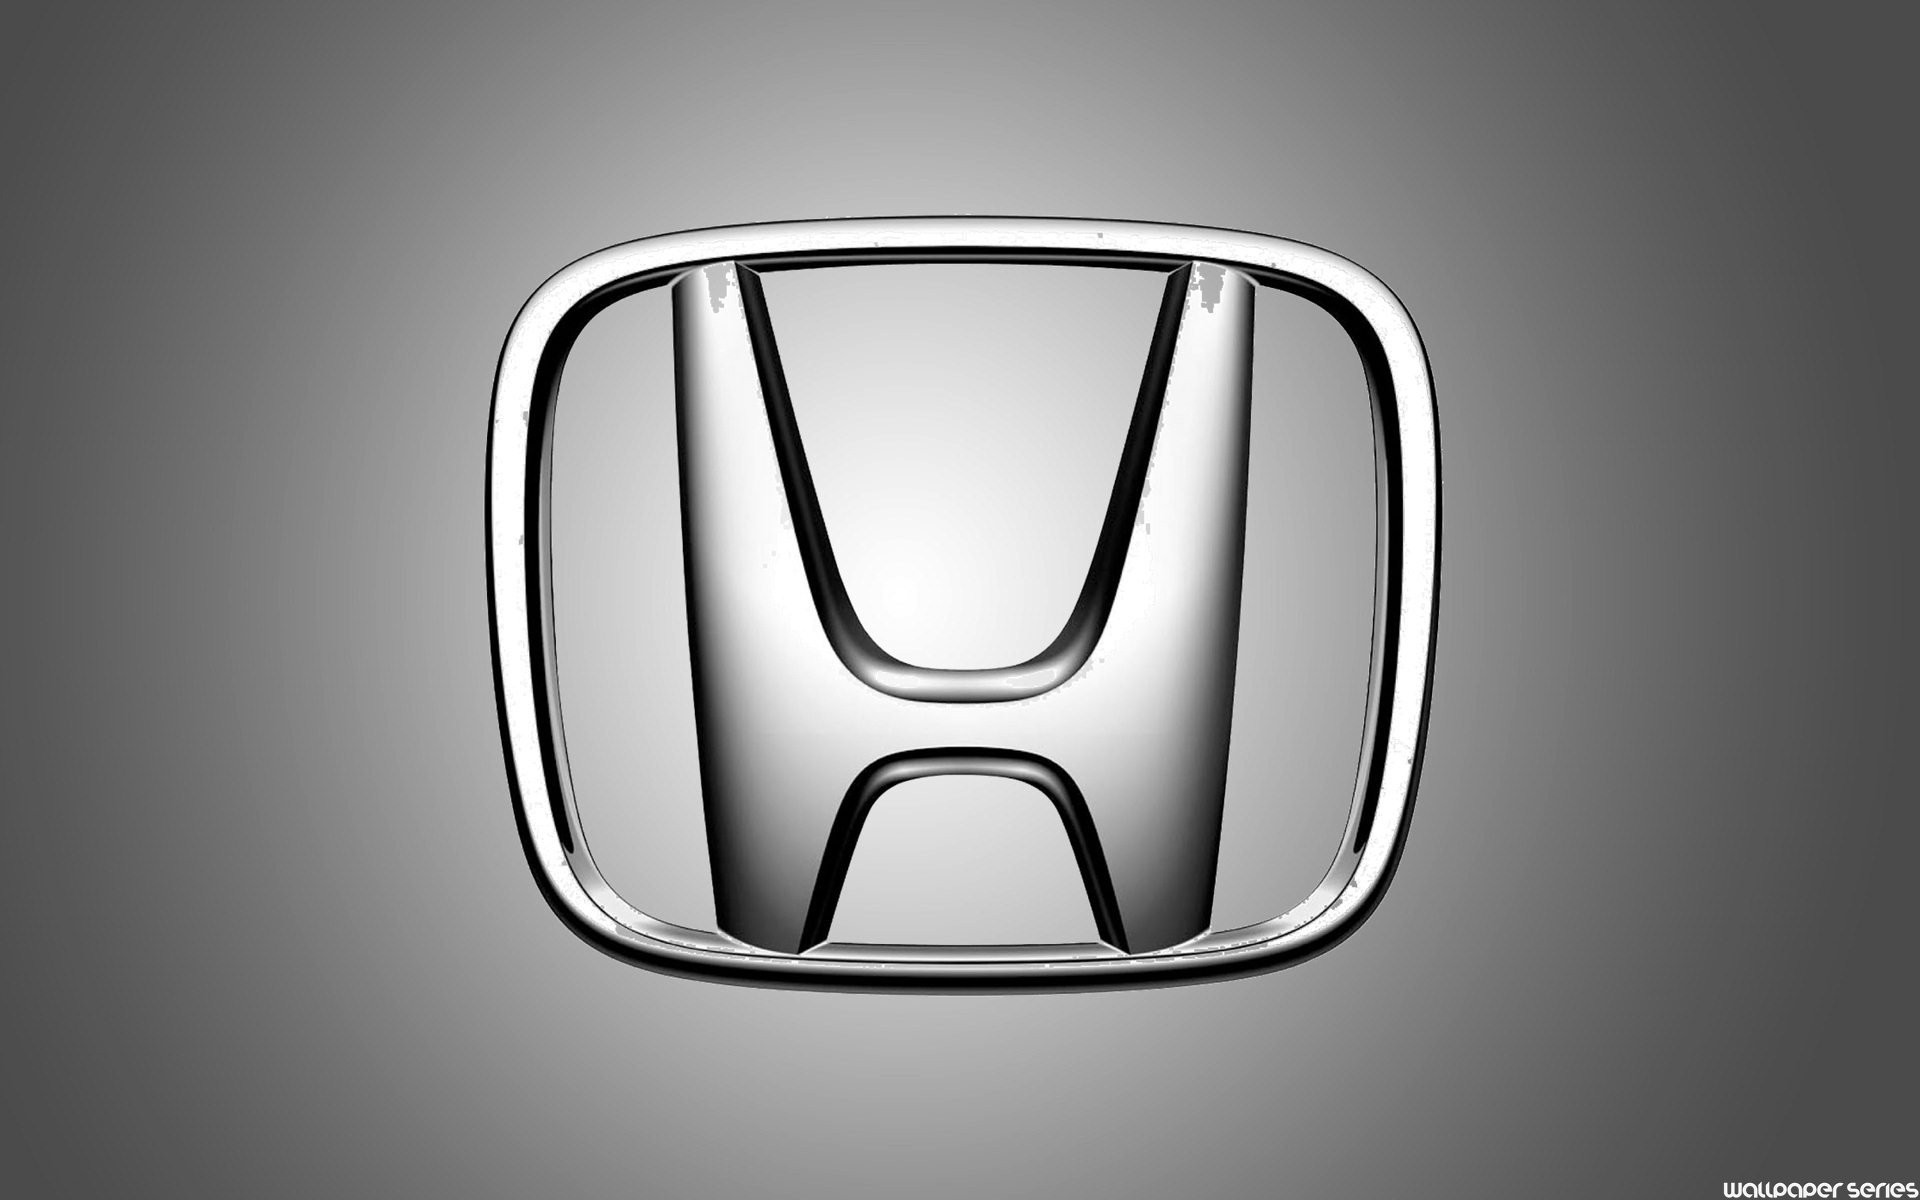 Honda Logo Wallpapers, Pictures, Images